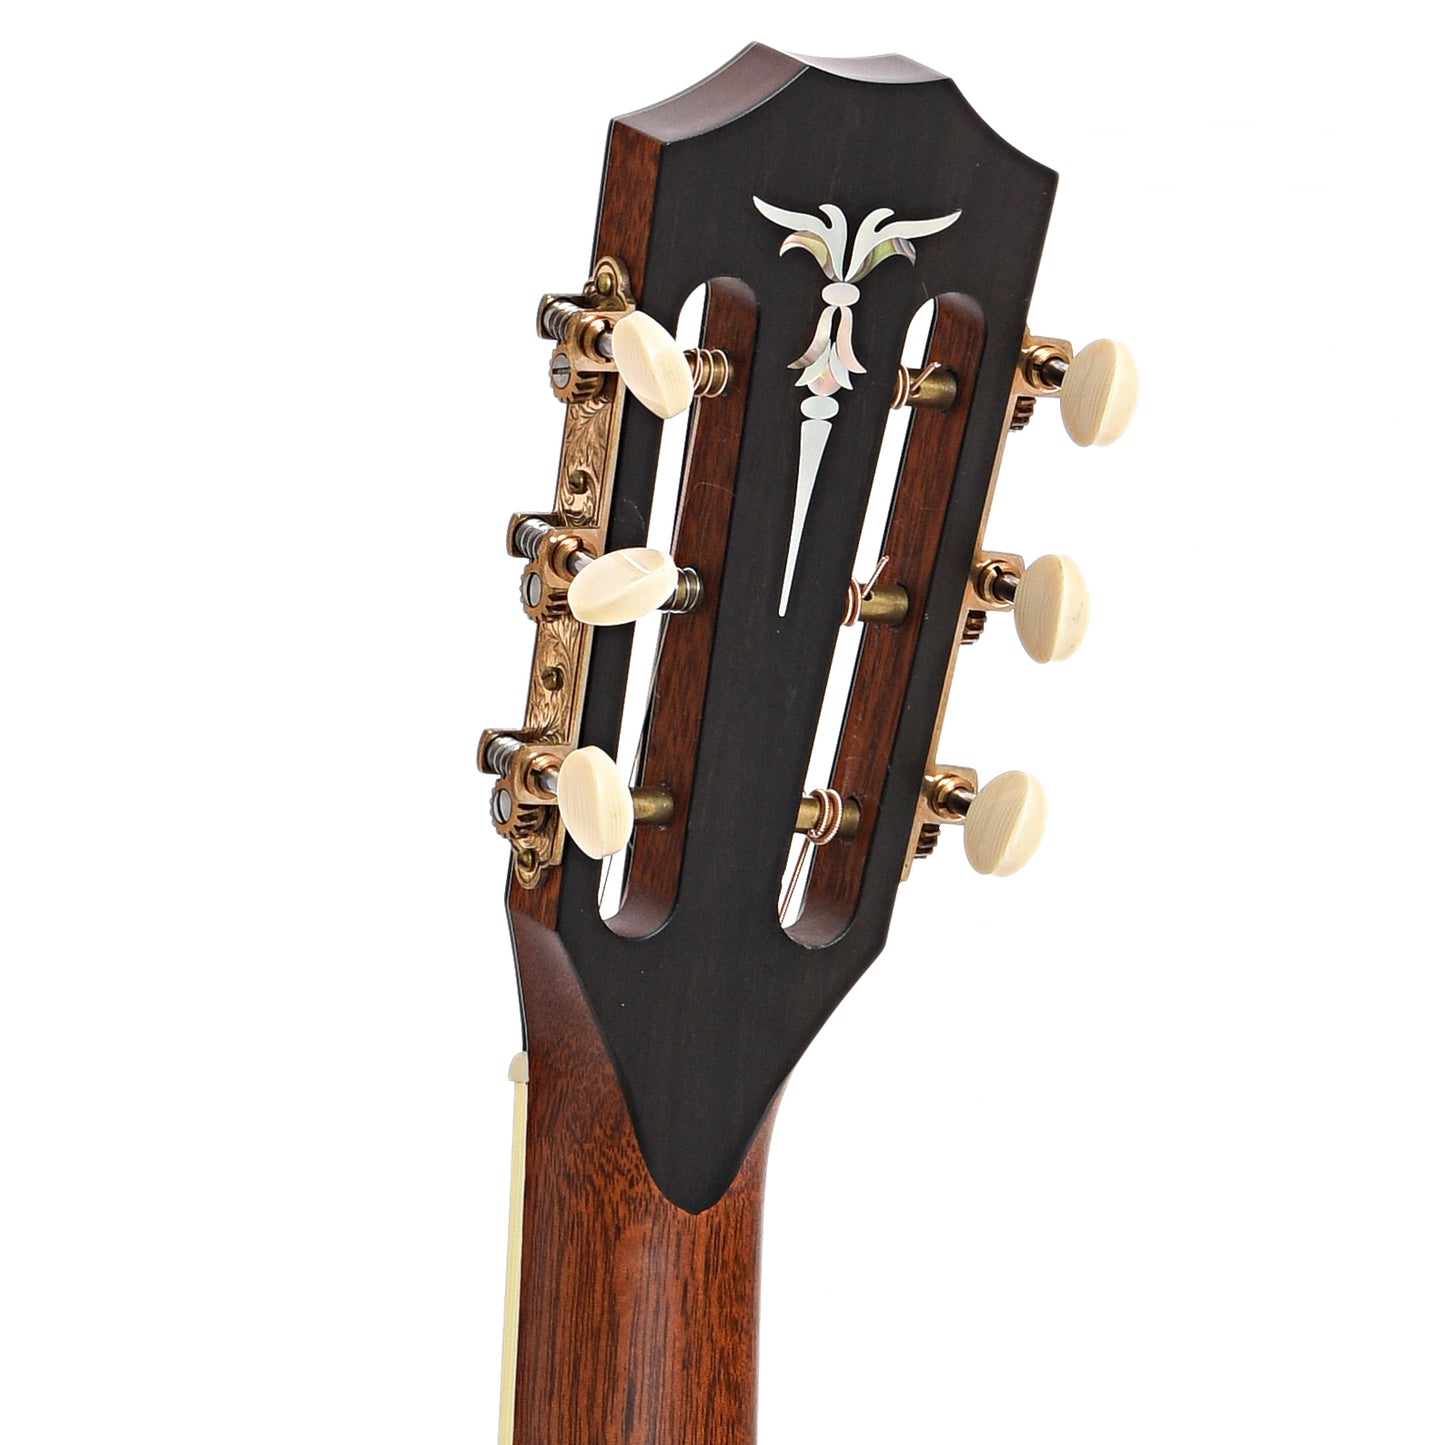 Taylor XXX-MS 30th Anniversary Acoustic-Electric Guitar (2004)